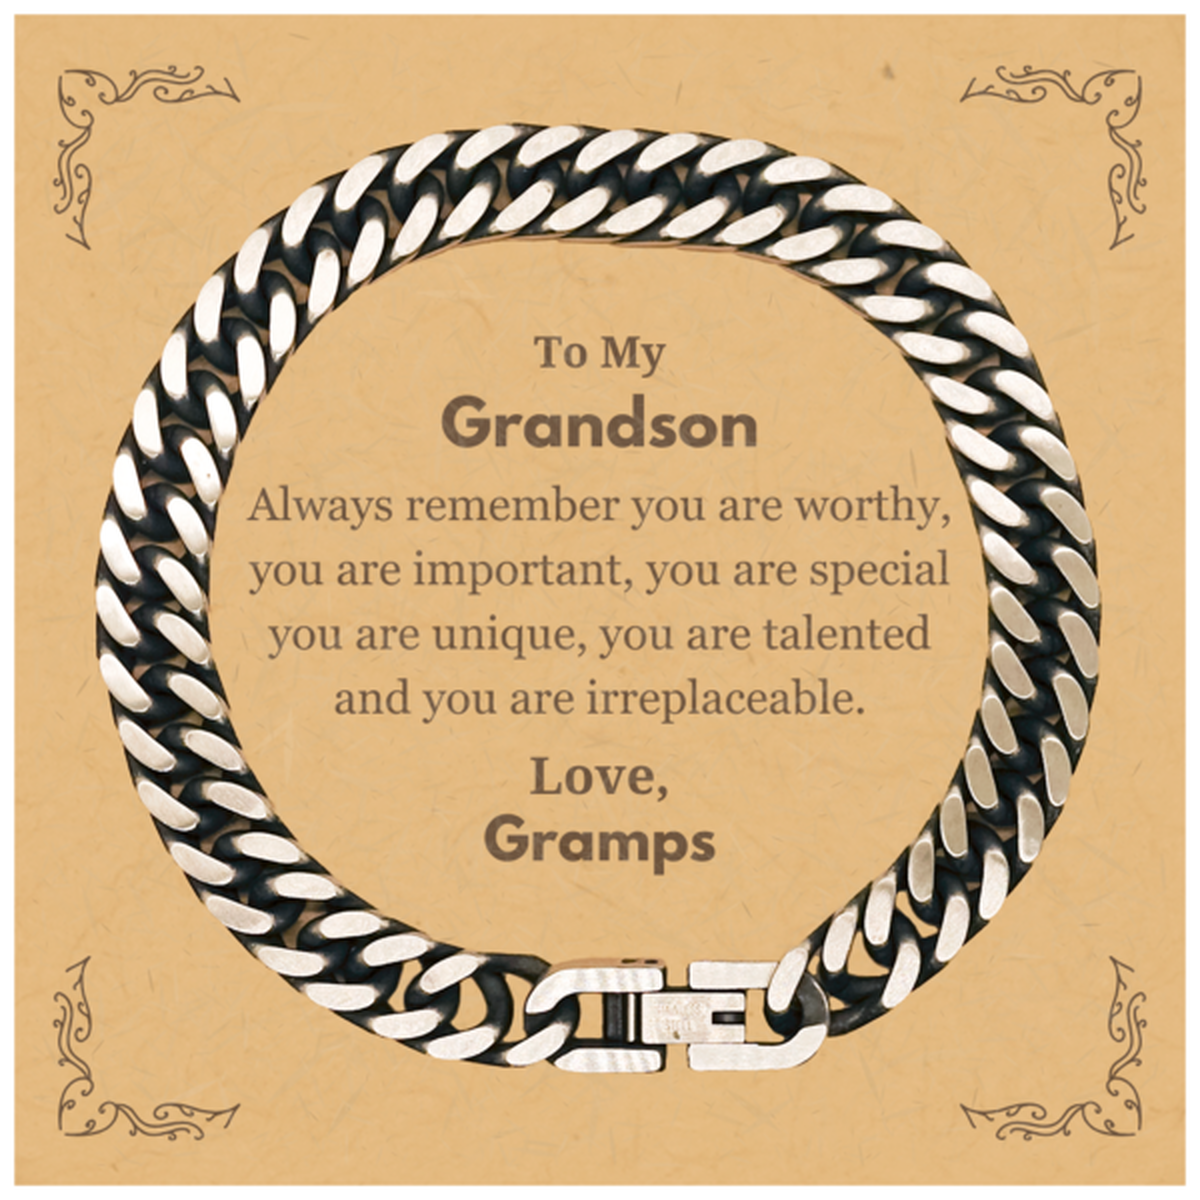 Grandson Birthday Gifts from Gramps, Inspirational Cuban Link Chain Bracelet for Grandson Christmas Graduation Gifts for Grandson Always remember you are worthy, you are important. Love, Gramps